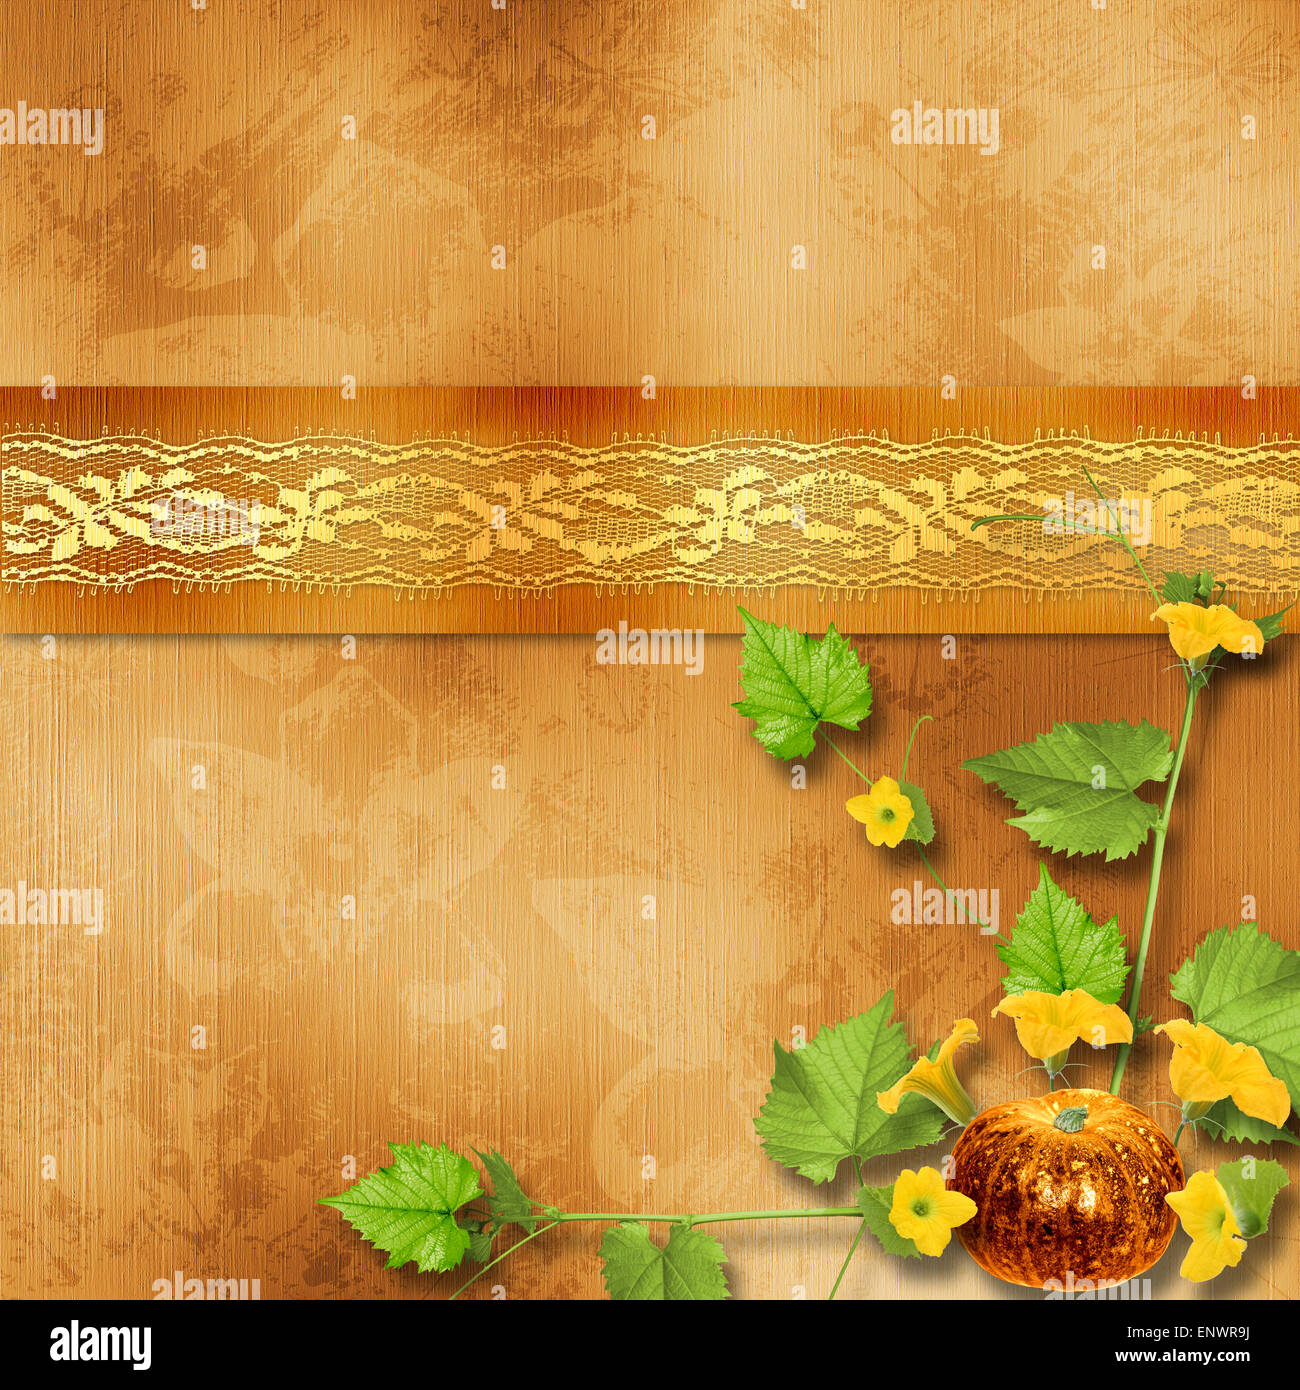 Grunge papers design in scrapbooking style with autumn foliage Stock Photo